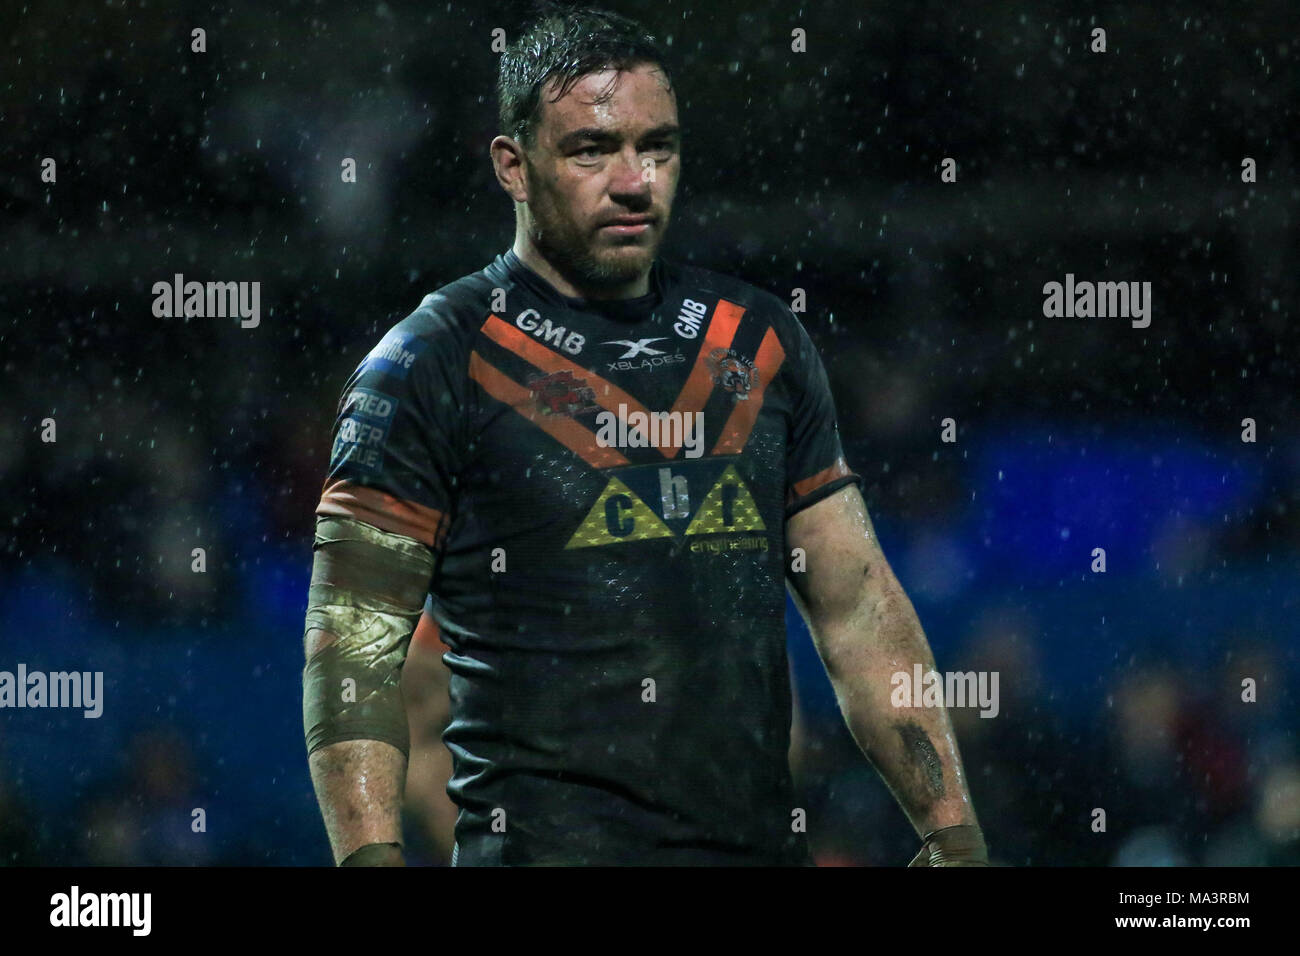 Wakefield, UK. 29th March 2018 , Mobile RocketStadium, Wakefield, England; Betfred Super League rugby, Wakefield Trinity v Castleford Tigers; Grant Millington of Castleford Tigers Credit: News Images/Alamy Live News Stock Photo